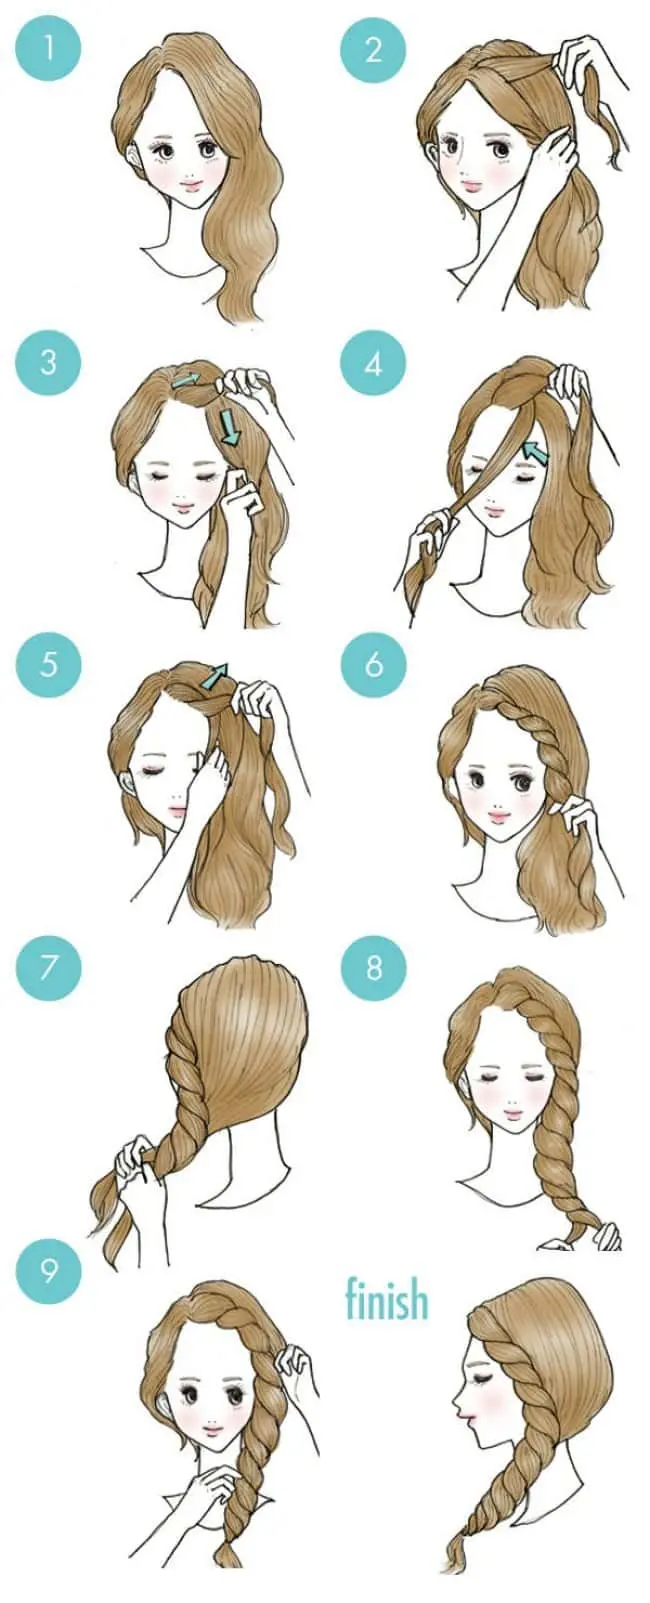 20 Easy And Cute Hairstyles That Can Be Done In Just A Few Minutes